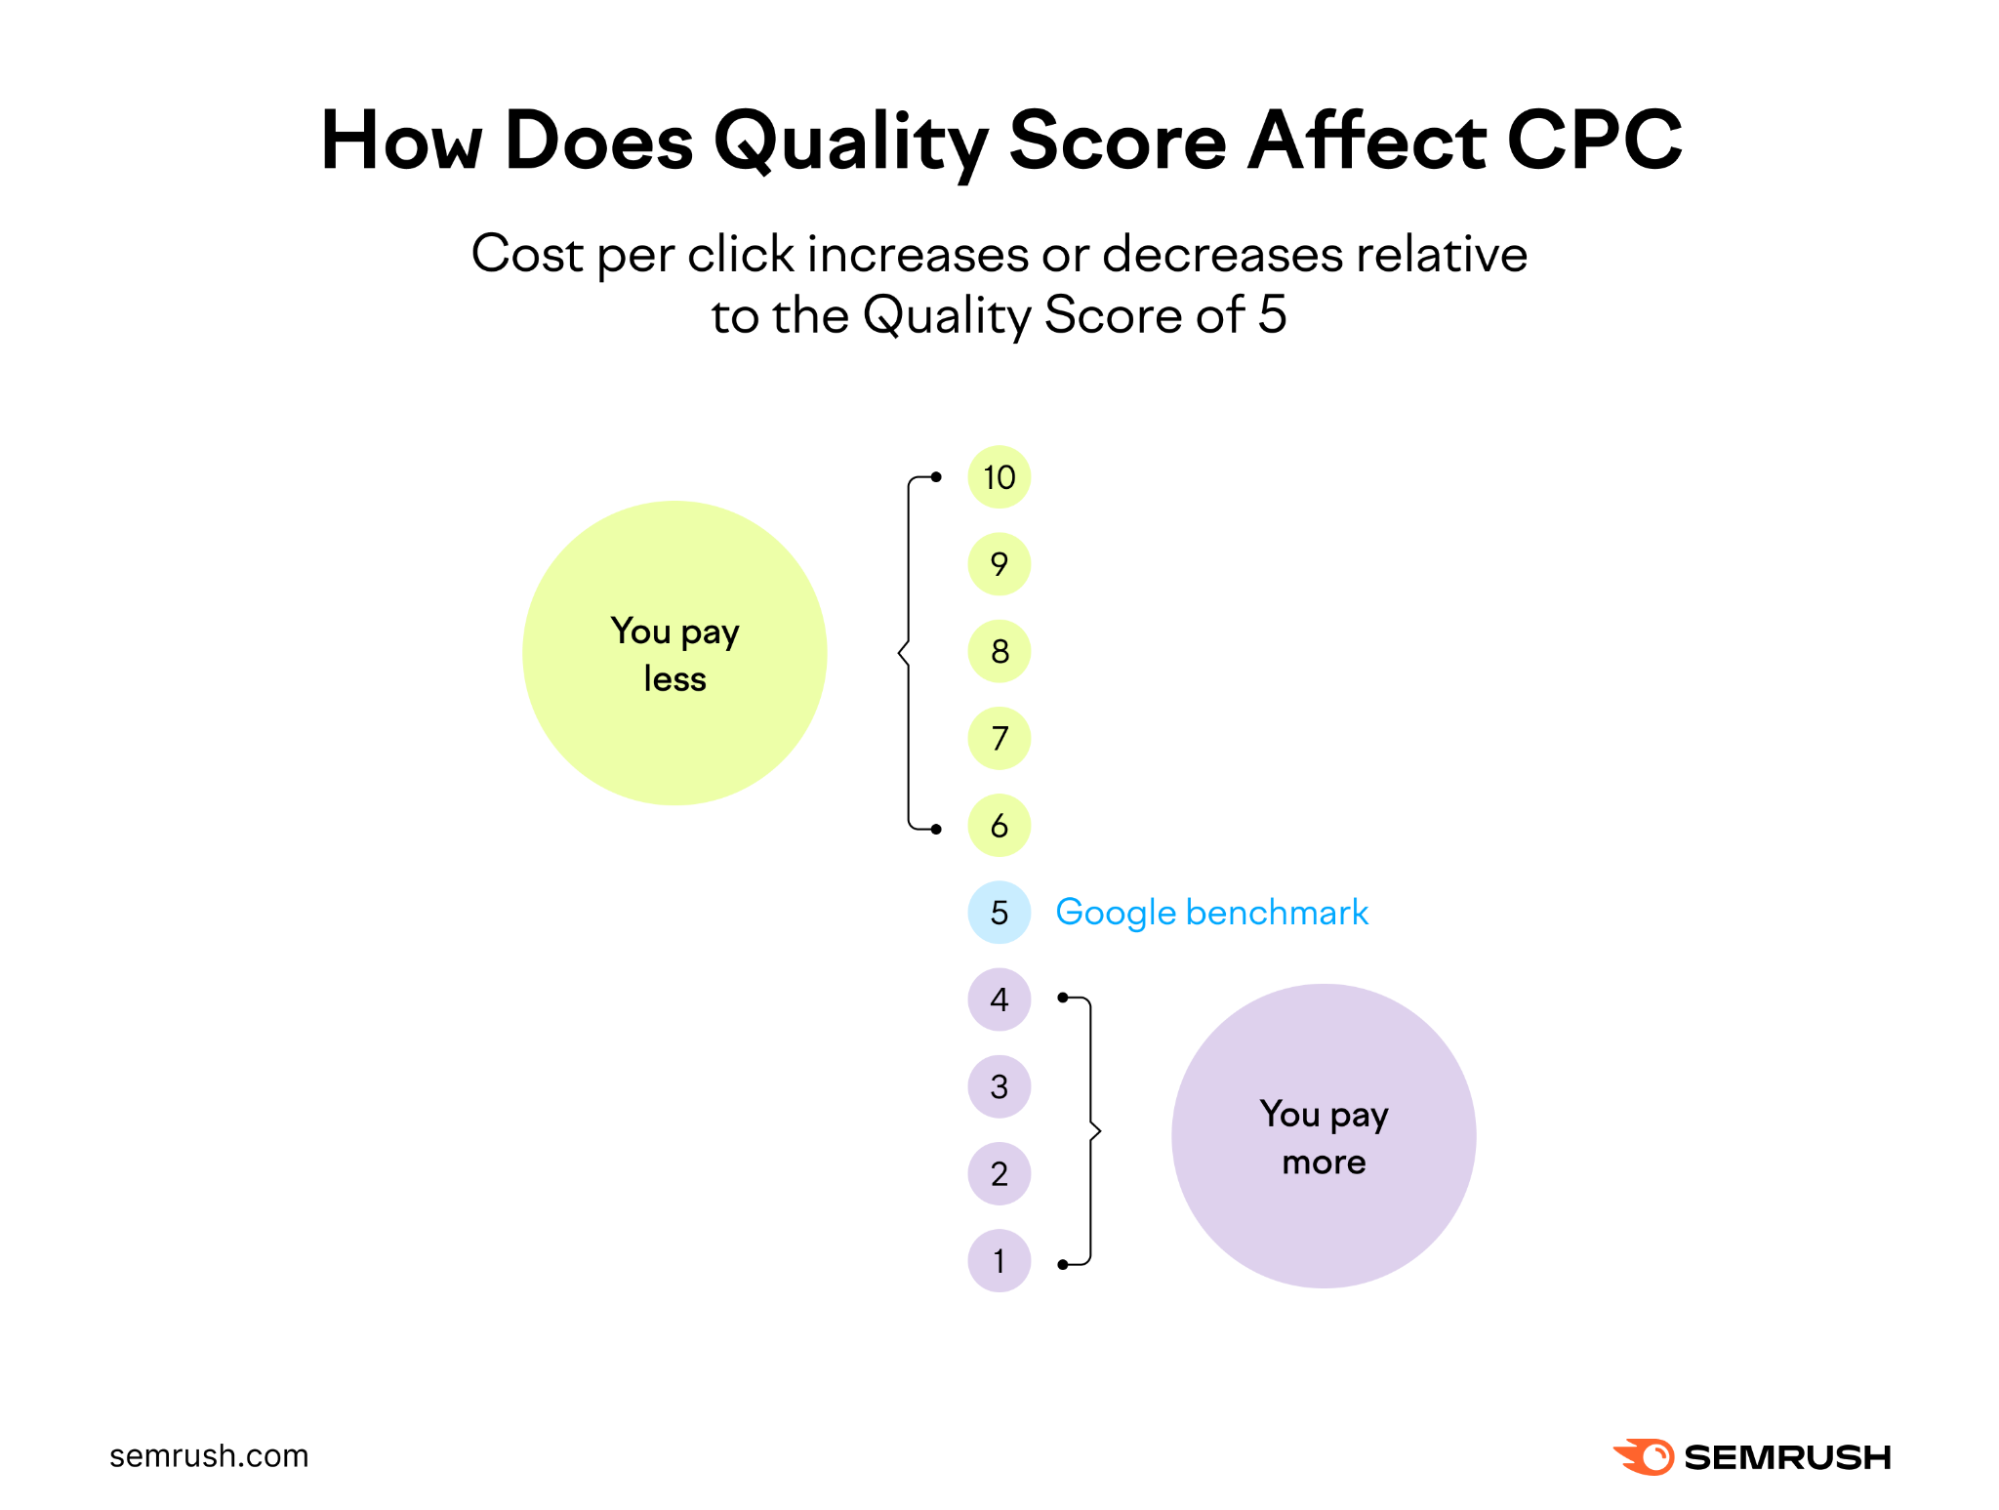 An infographic showing how quality score affects CPC